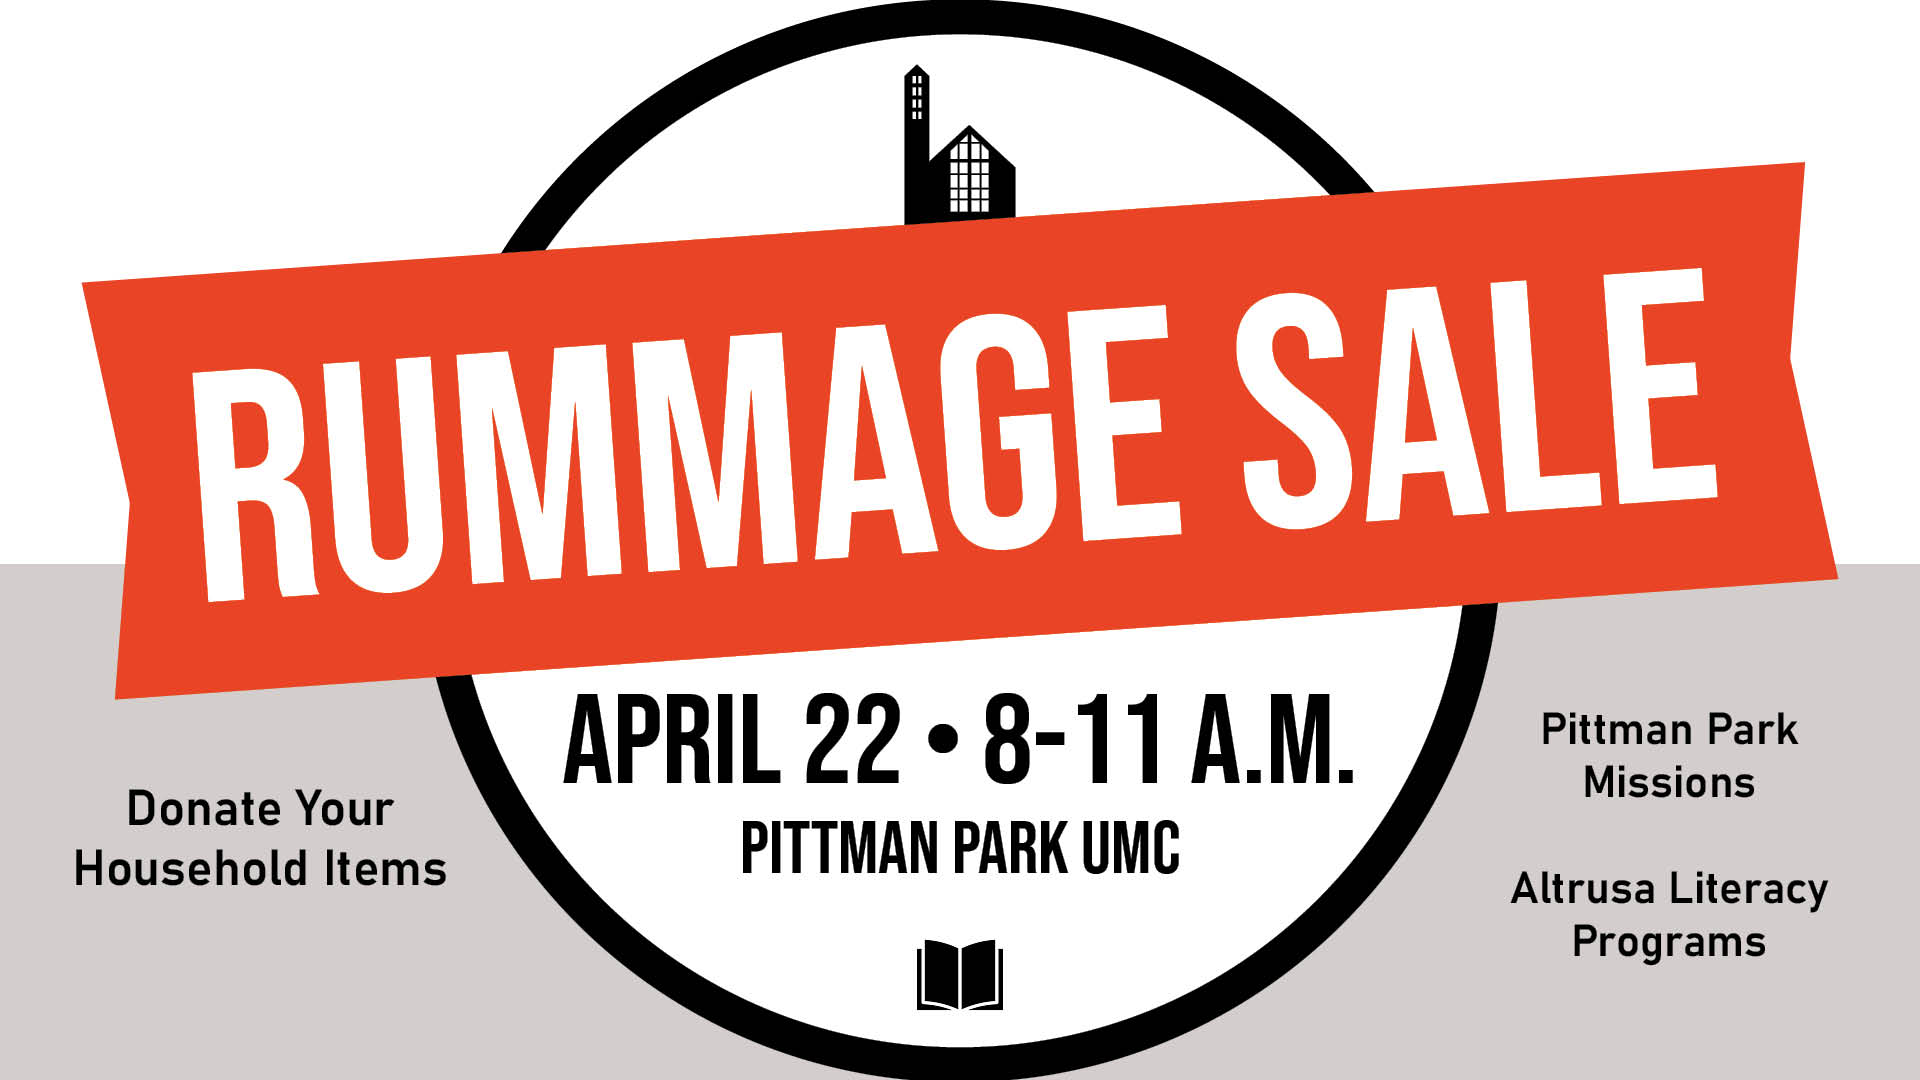 A graphic with the words Rummage Sale on a red ribbon with a black icon in the shape of the Pittman Park church building and other event information in black type